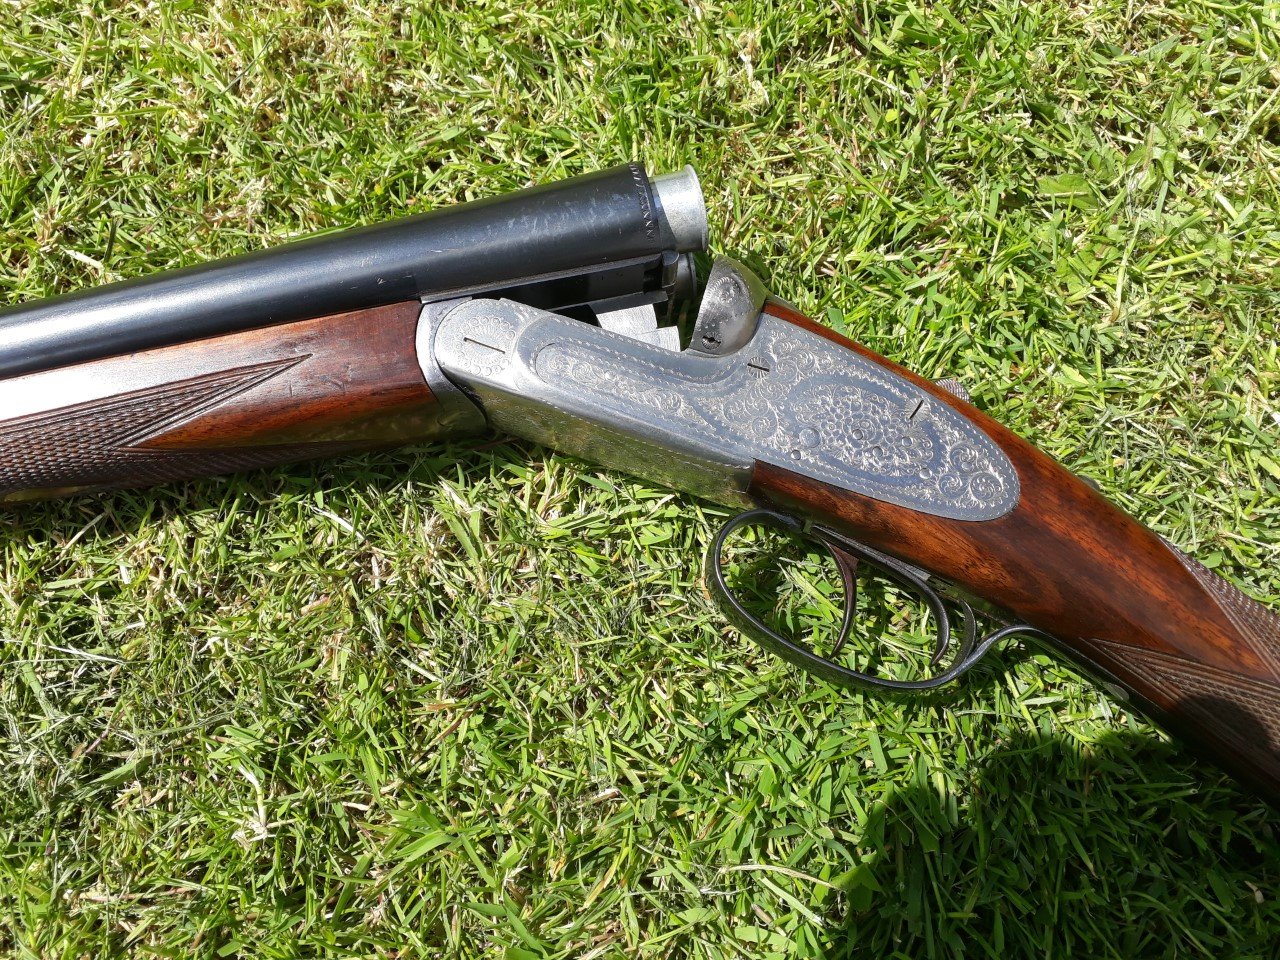 Ugartechea/Parker Hale 604 sidelock ejector,12 bore,with cartridges